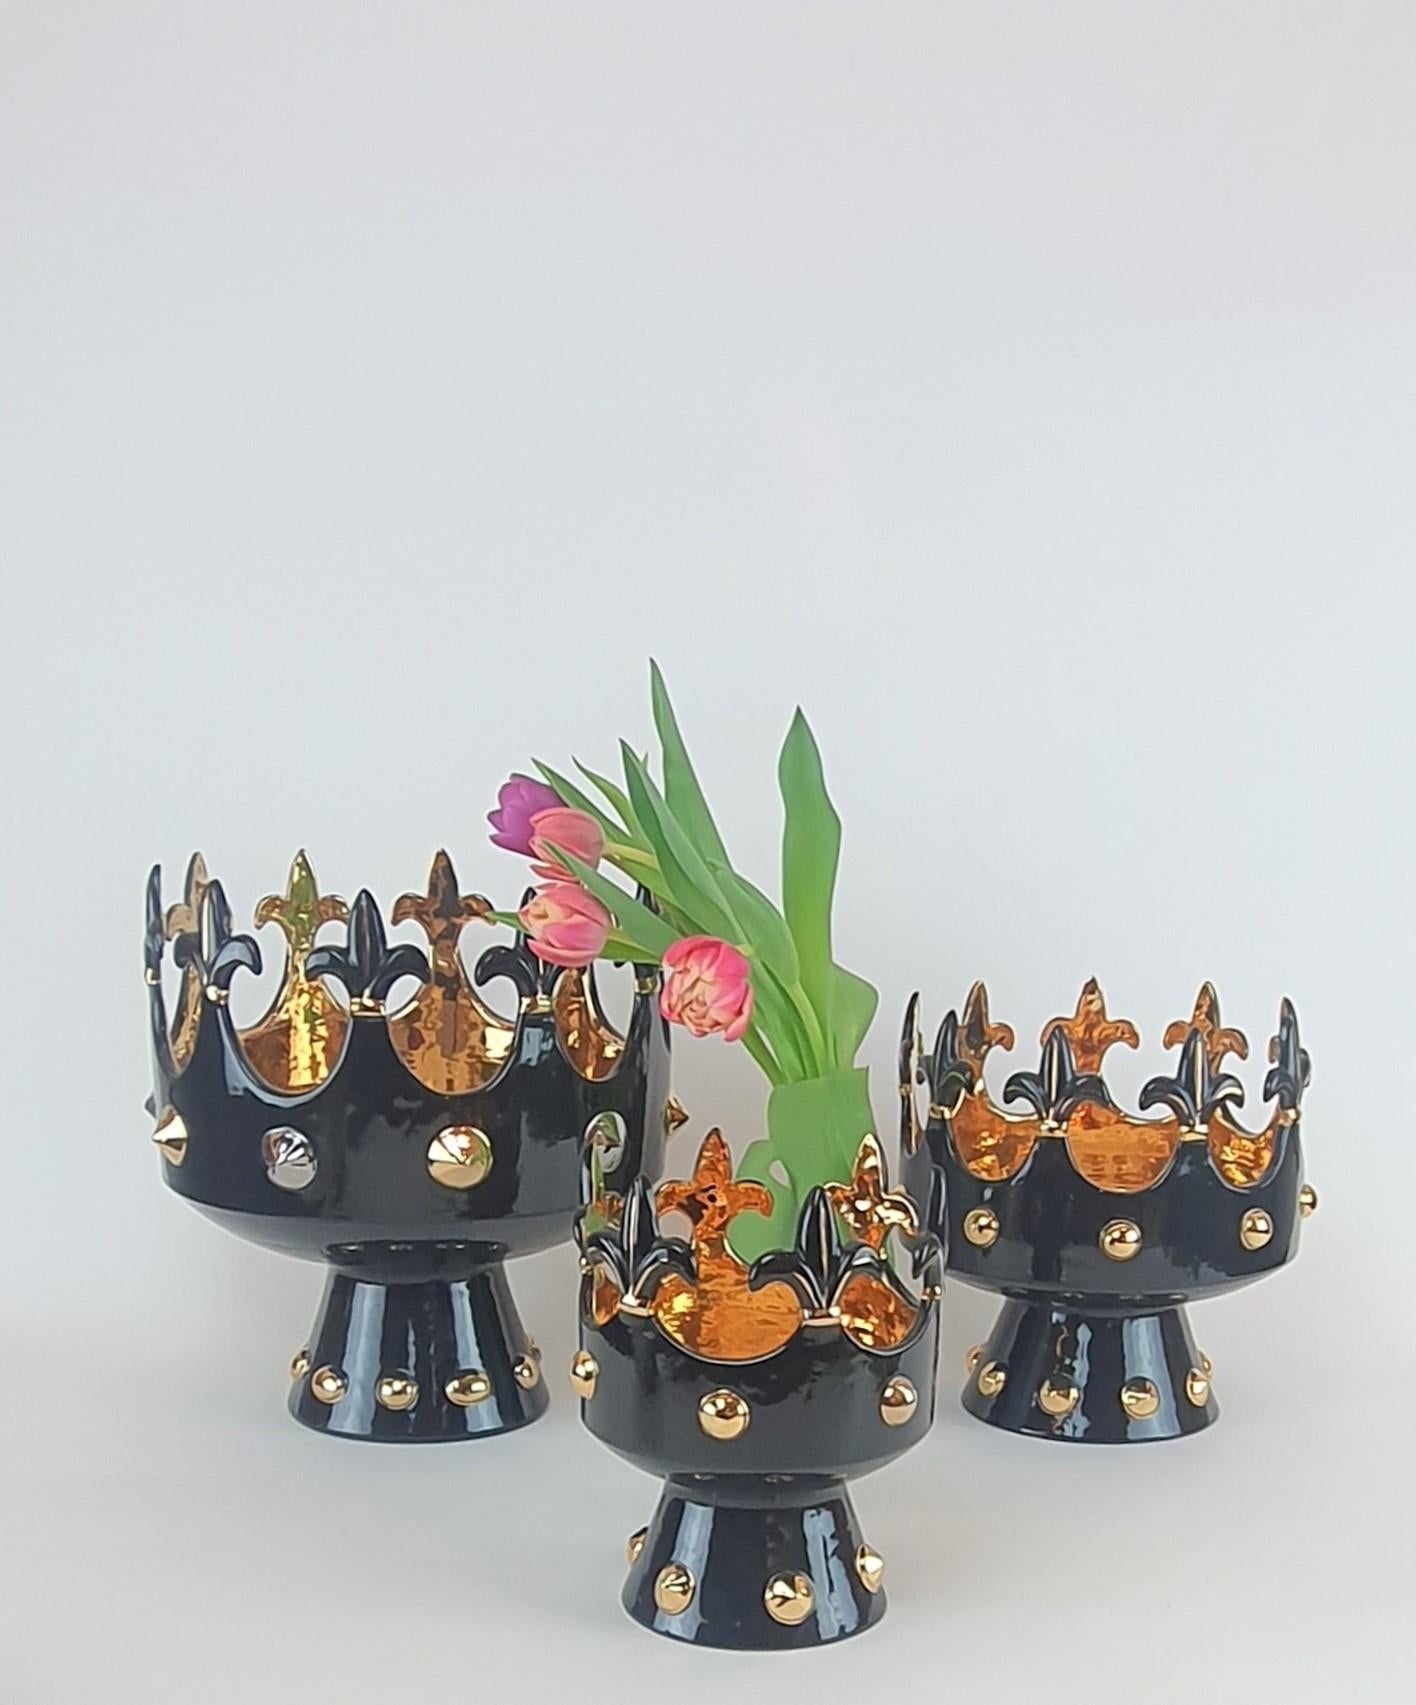 CARLA CORONA elegant cup or centerpiece in ceramic, forged on the lathe and hand painted. The inside of the crown is entirely painted in pure gold, while the outside is presented in a bold and gritty black colour. The crown is modeled in the upper